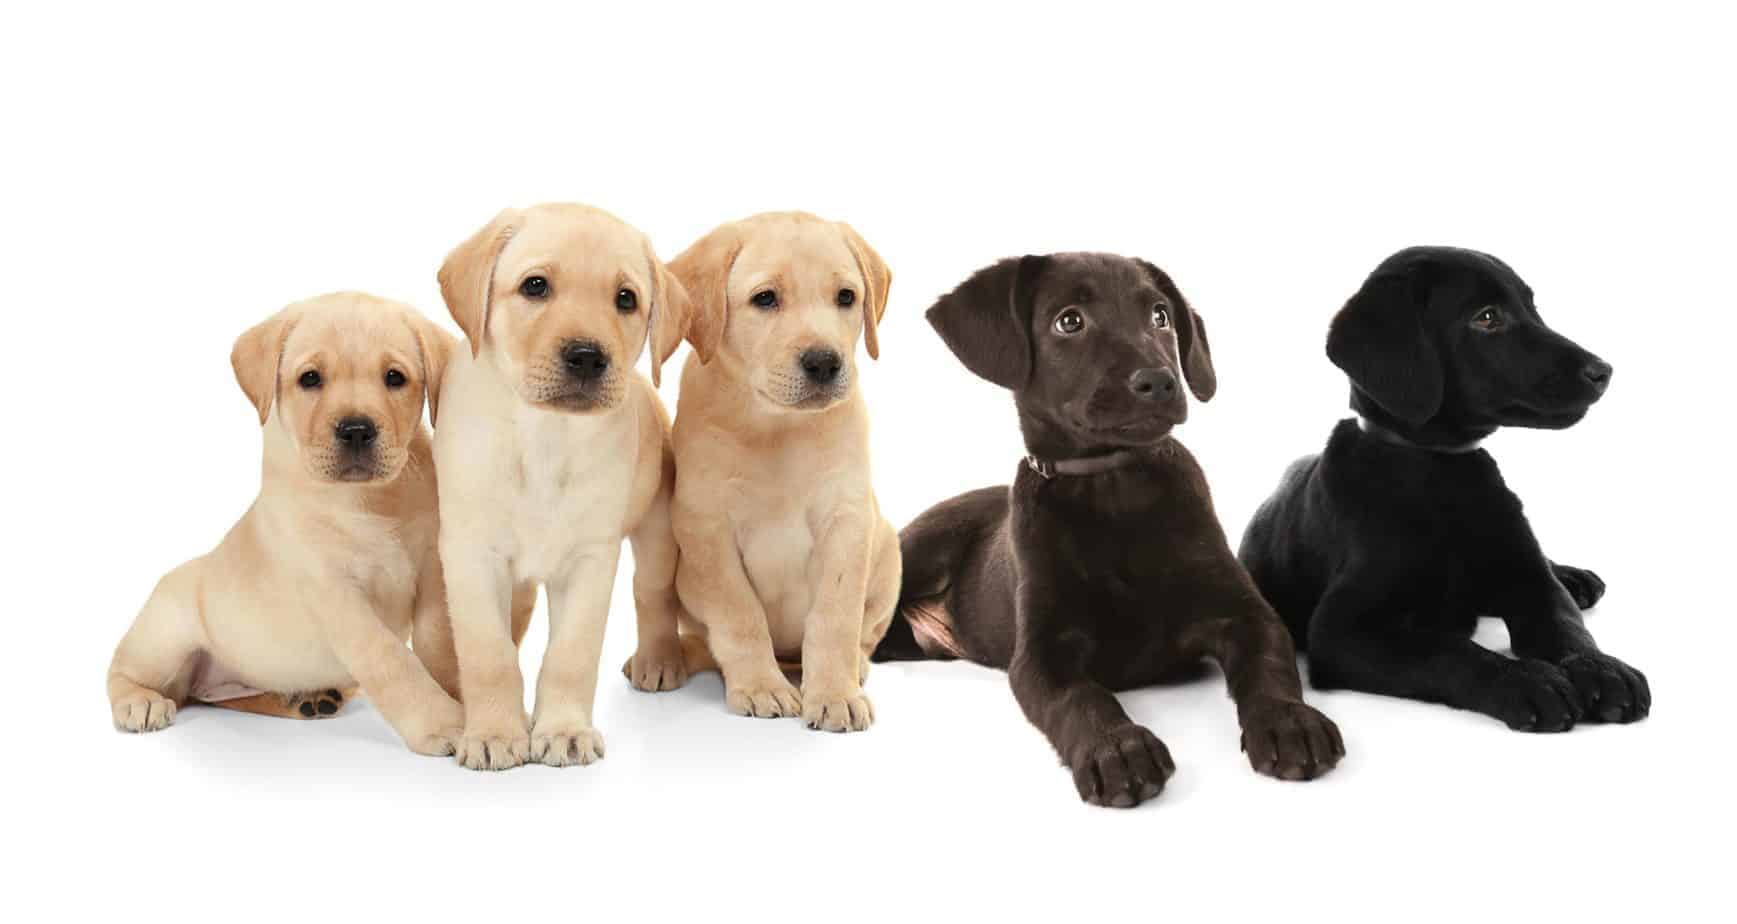 Labrador Retriever: Easy to train dogs good for first-time owners